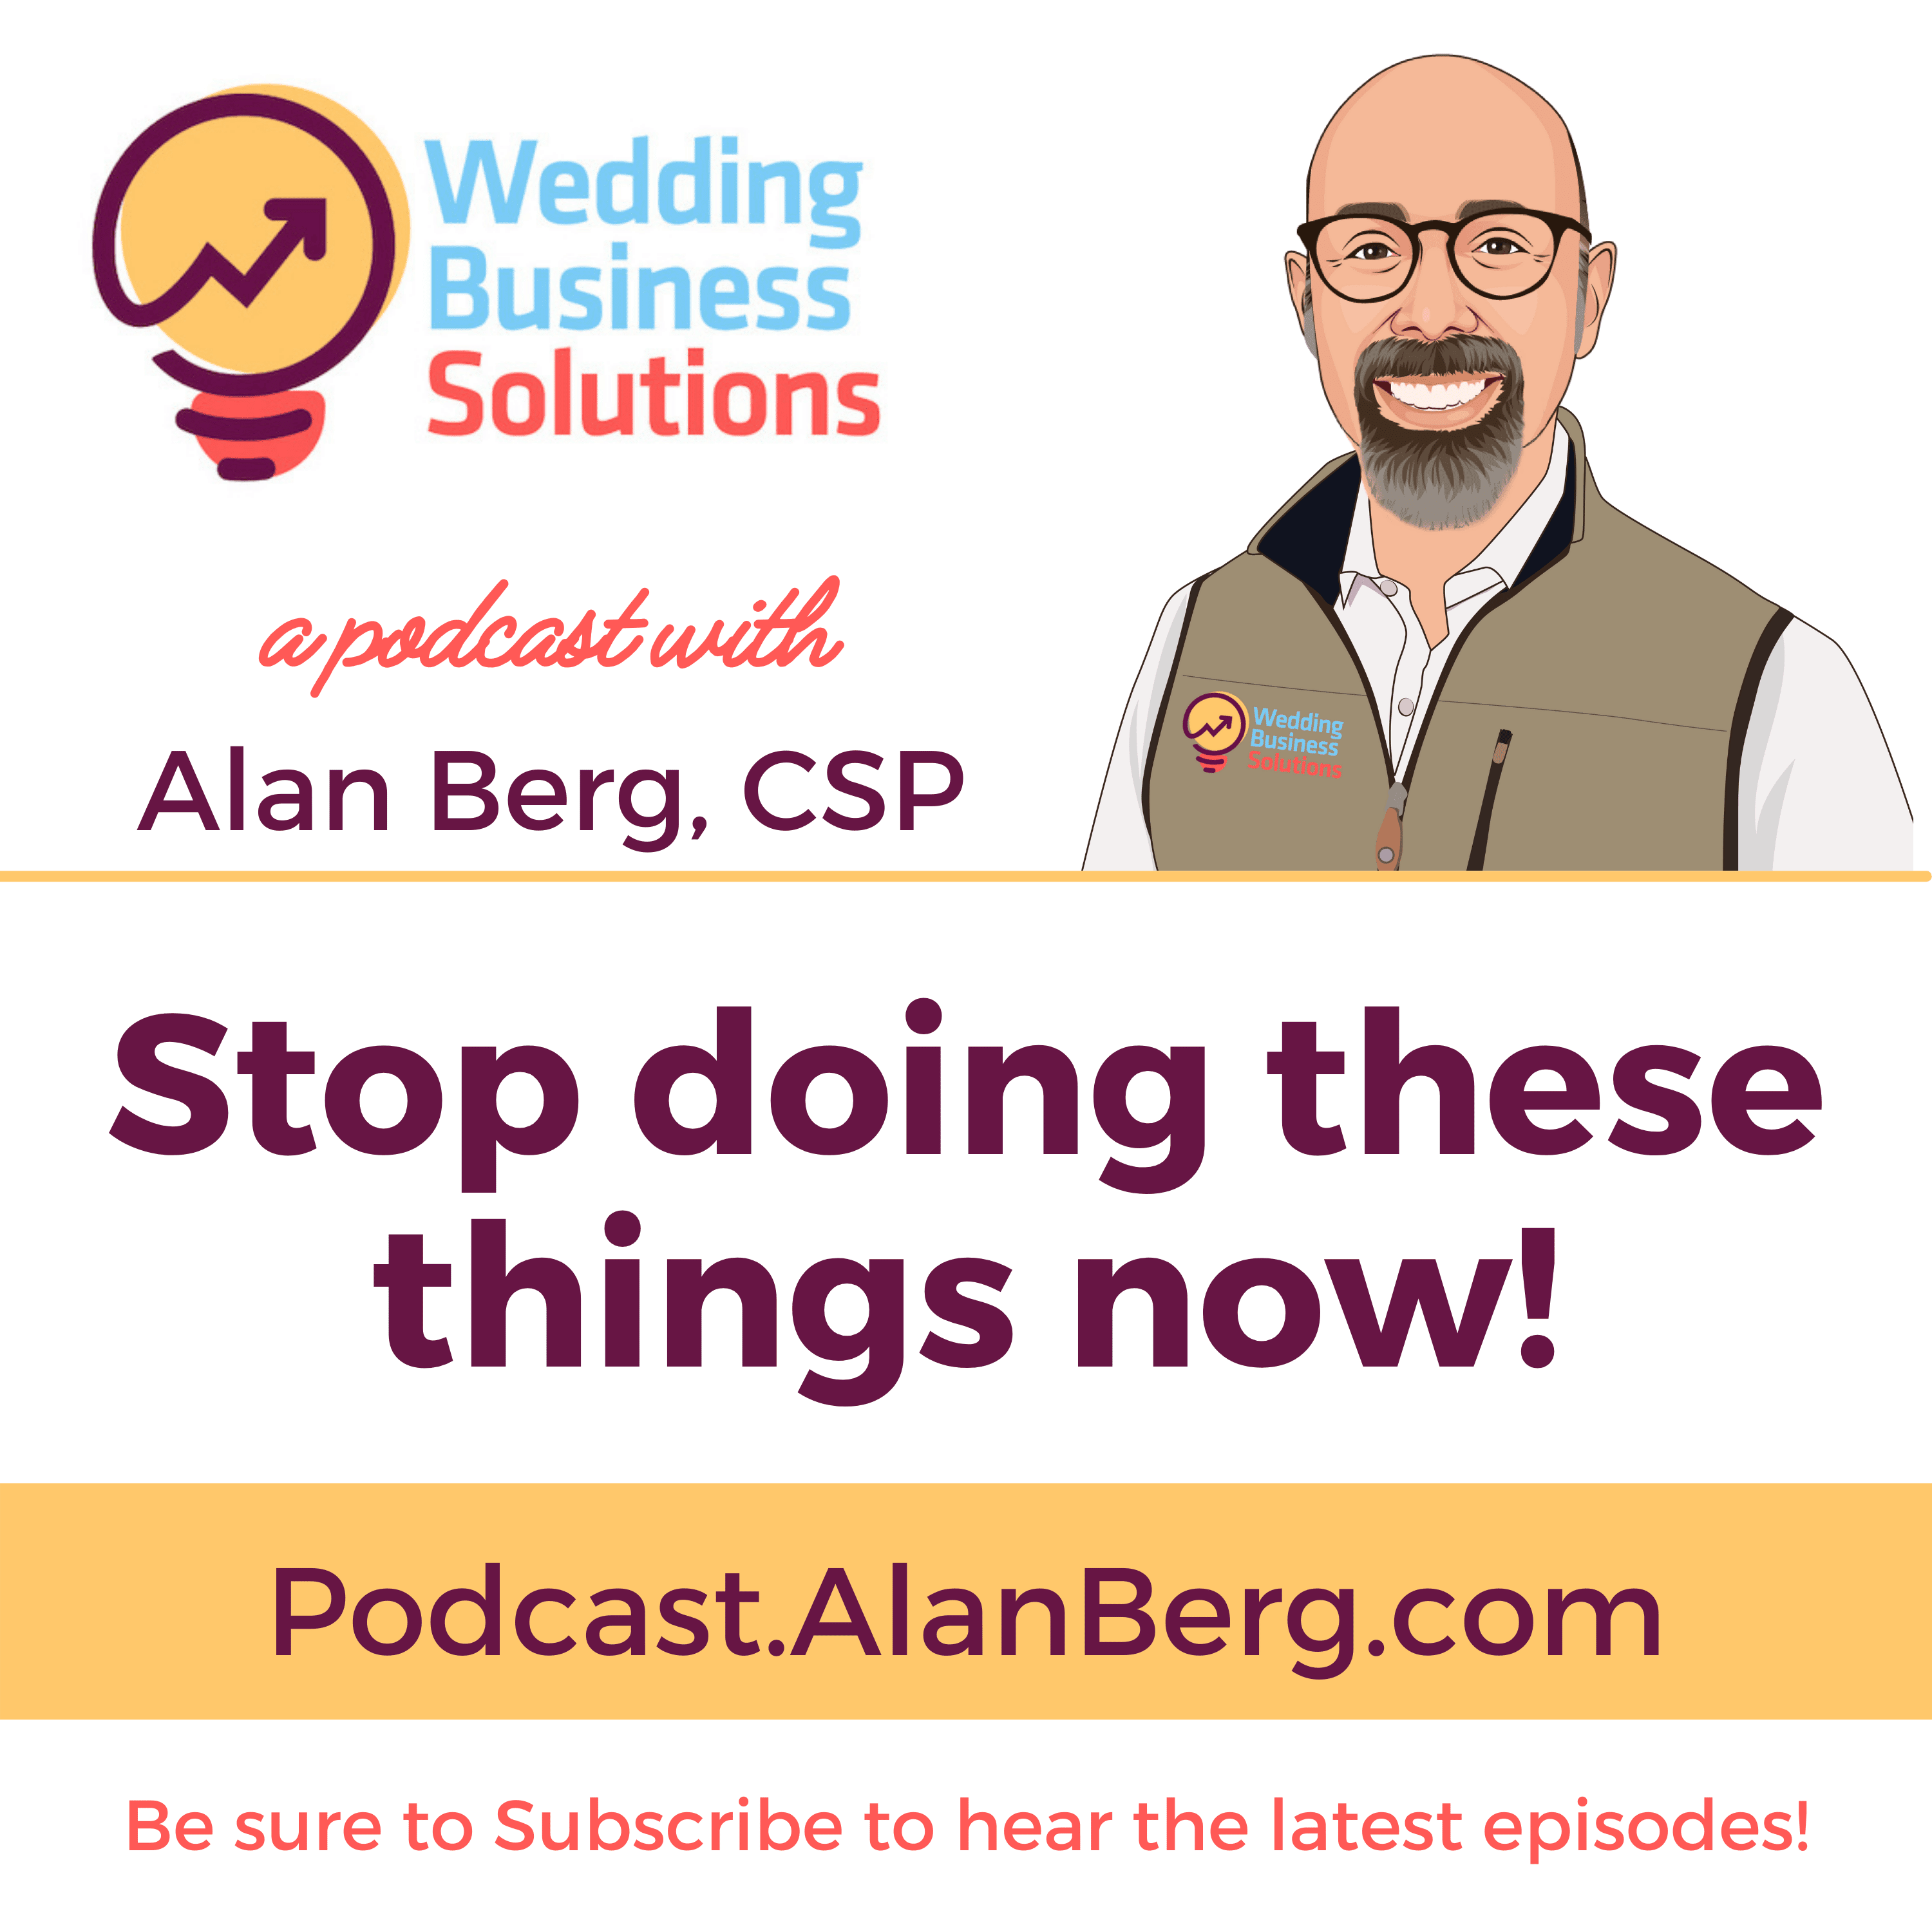 Stop doing these things now! - Wedding Business Solutions Podcast with Alan Berg CSP